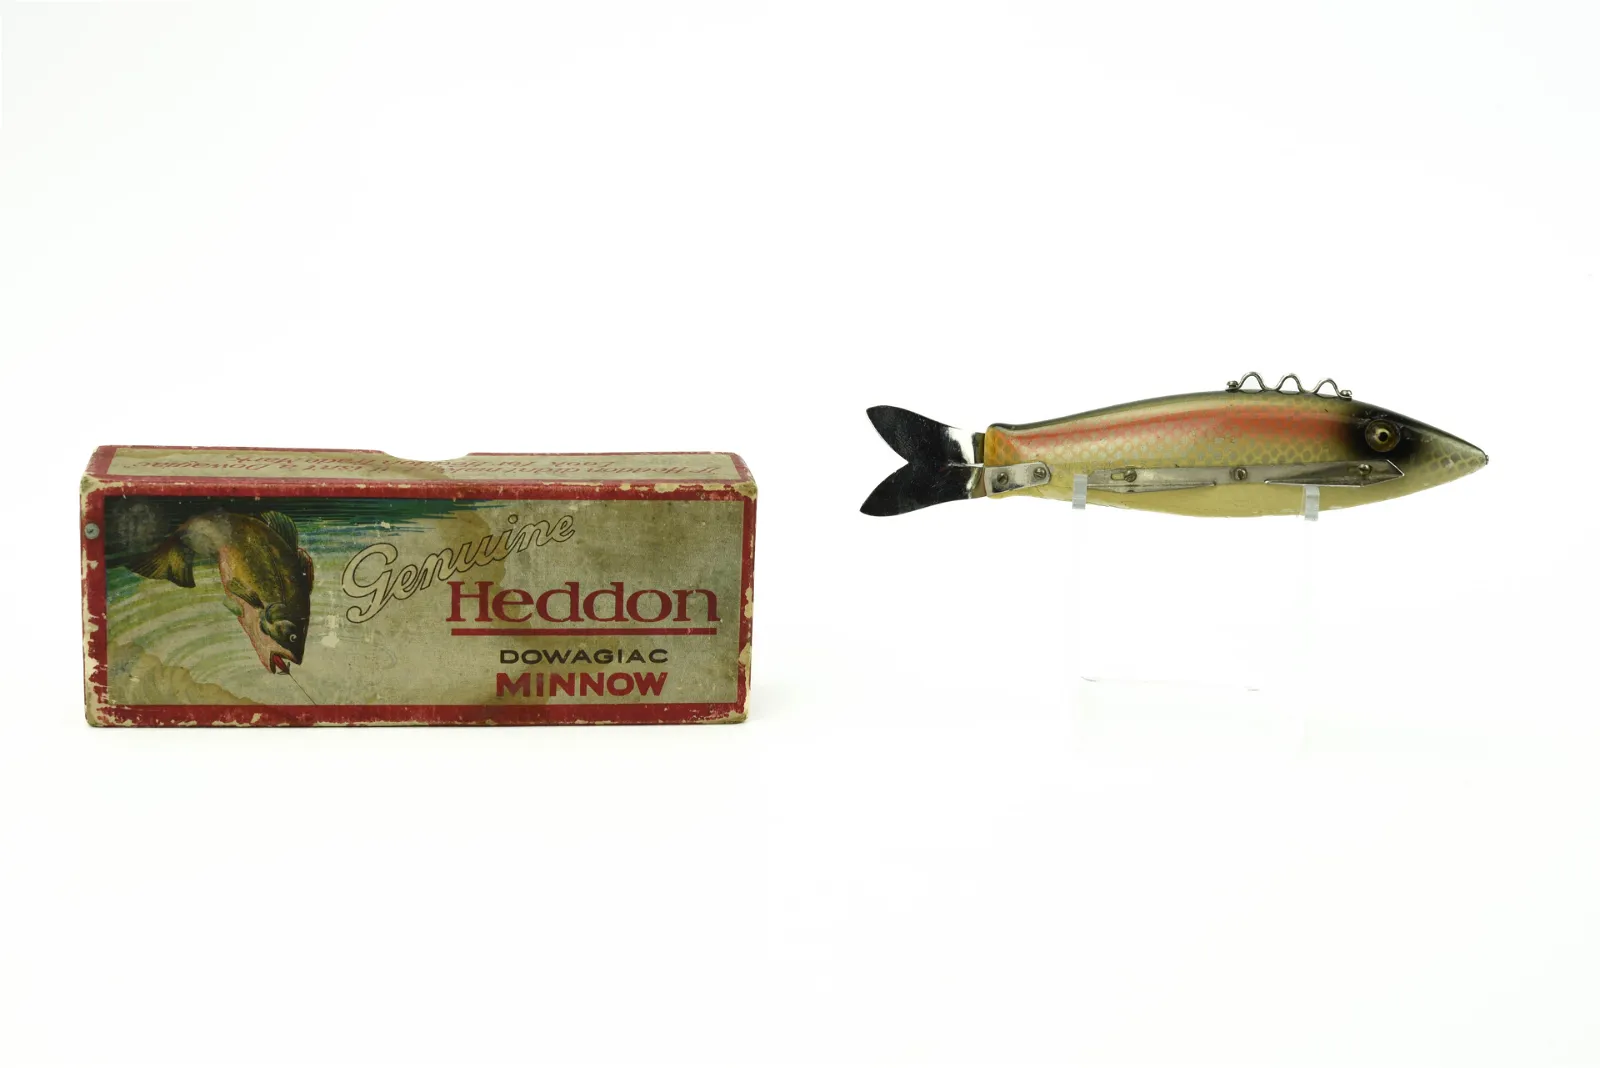 Heddon 409p ice fish decoy, $7,687 with buyer’s premium at Blanchards and Lang's.